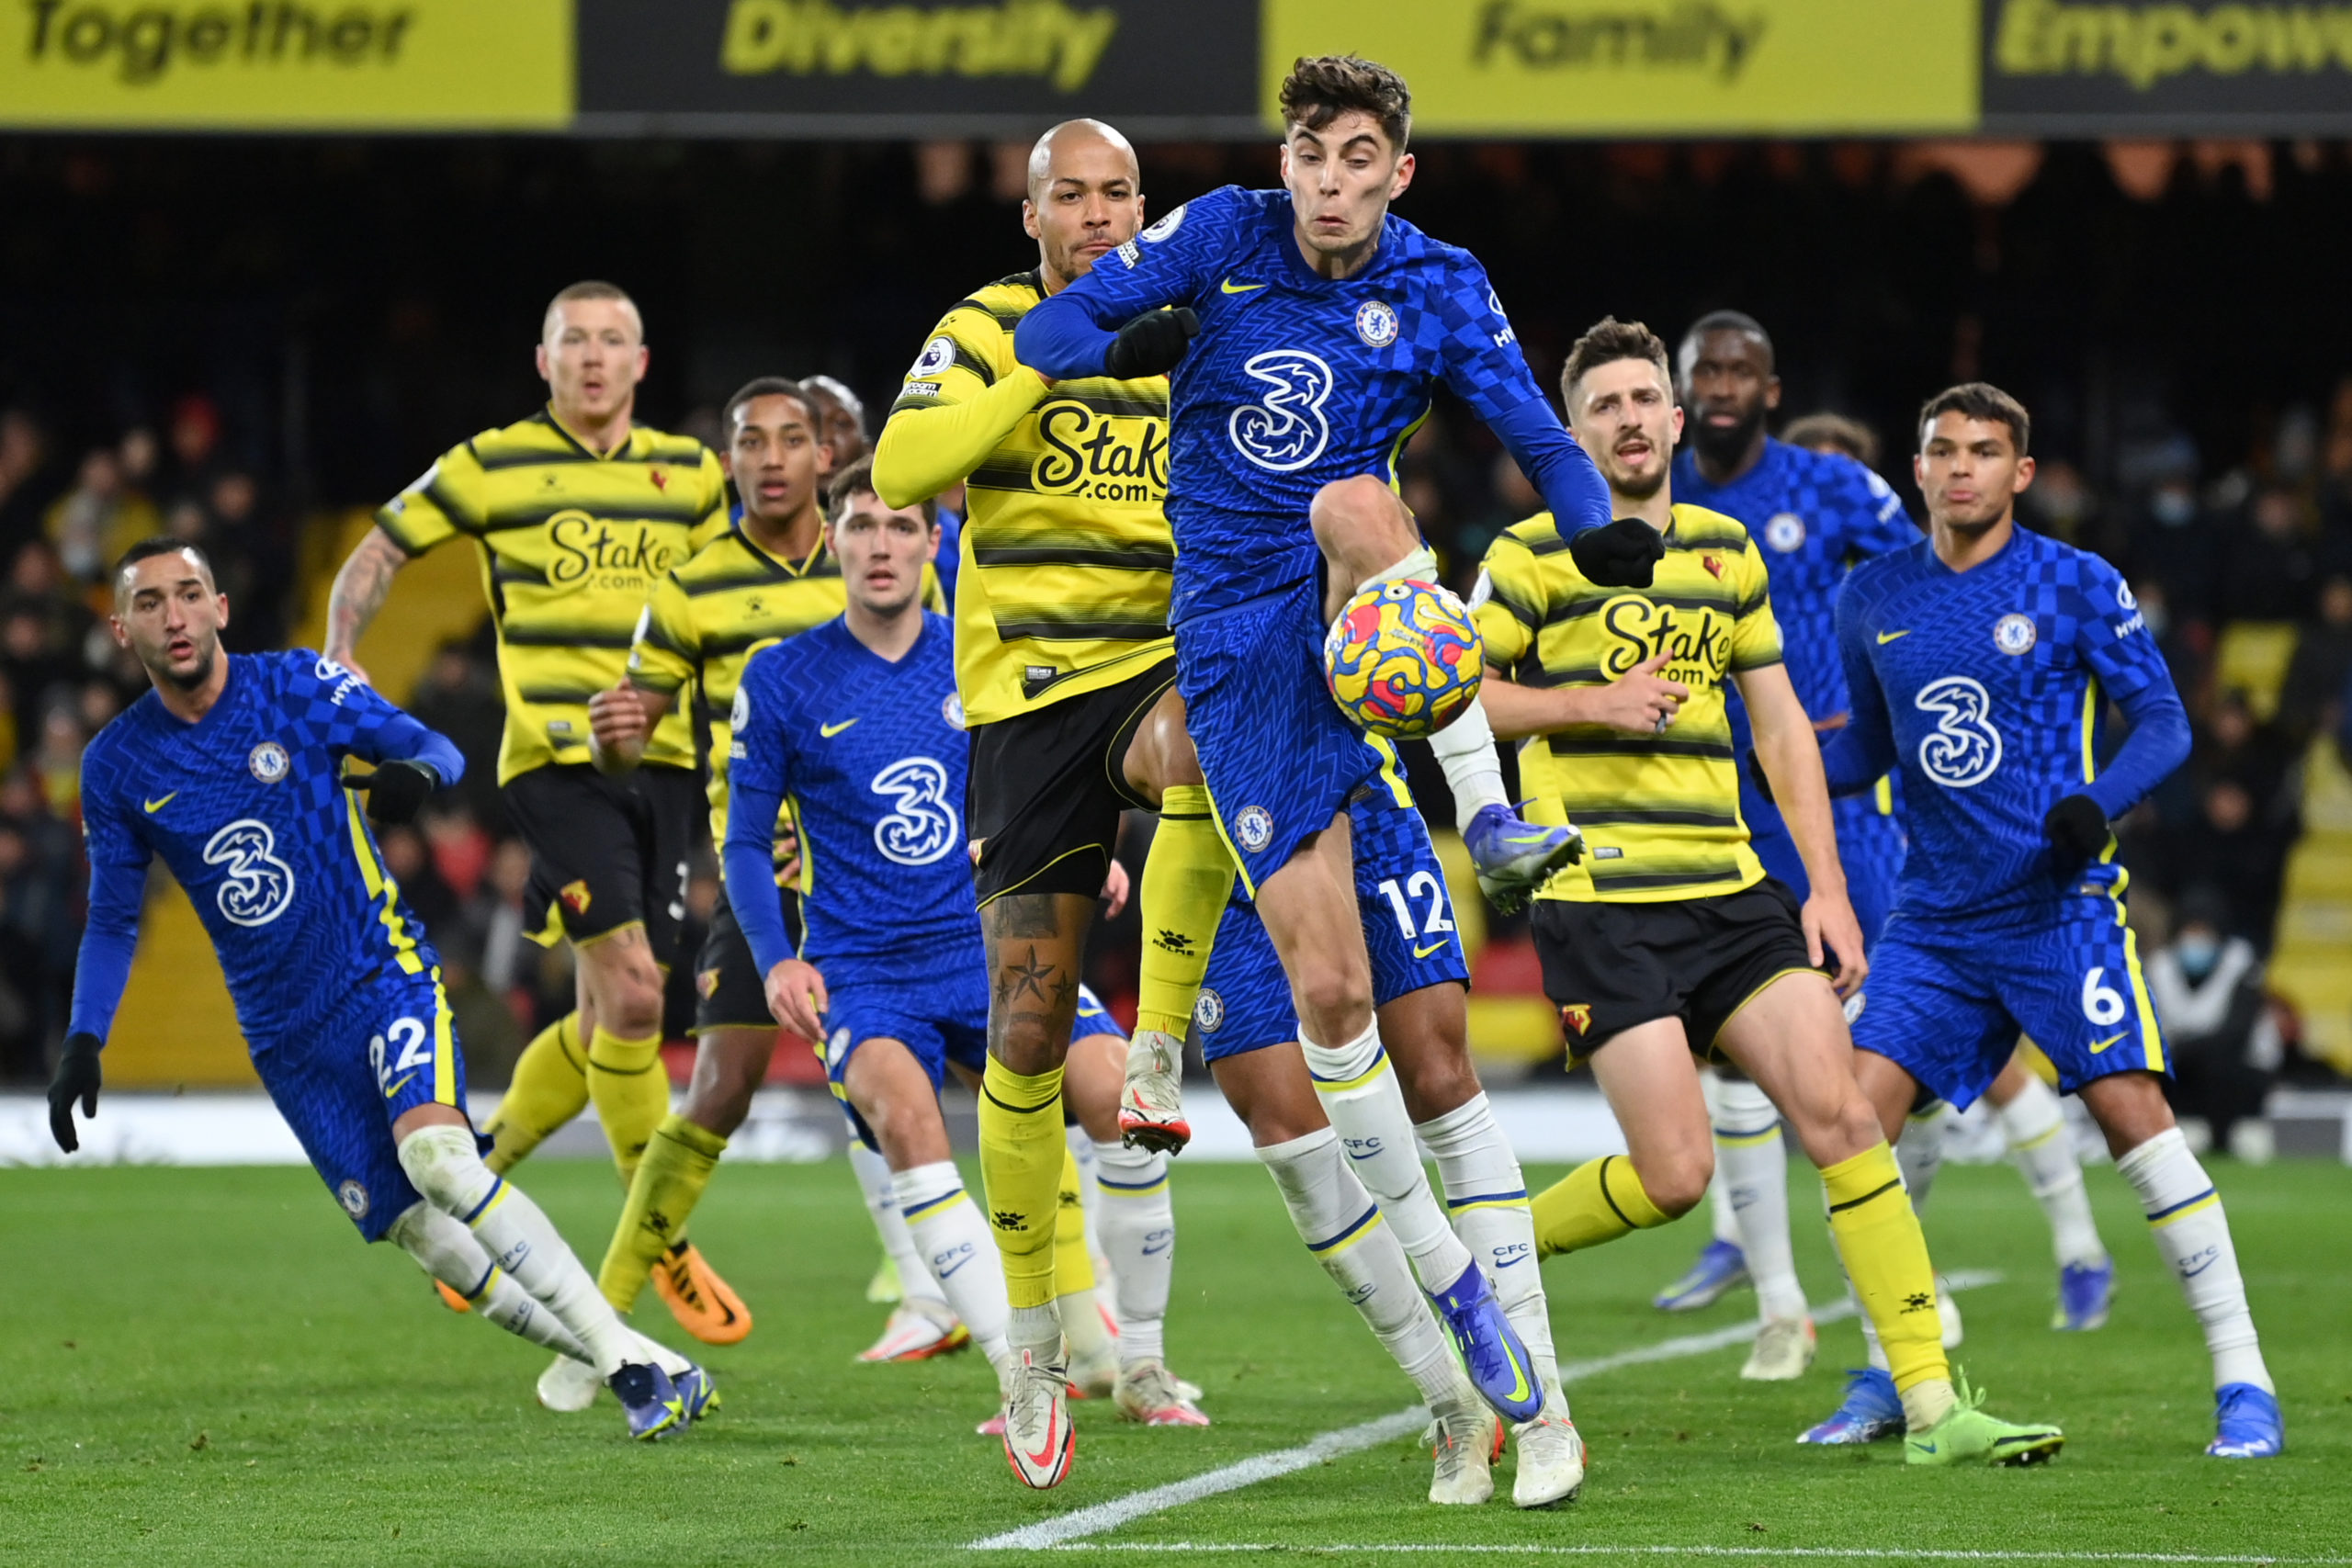 Chelsea vs Watford LIVE: The Blues face a relegated Watford side after securing THIRD spot in the Premier League, Follow Chelsea vs Watford LIVE Streaming: Team news, Predictions